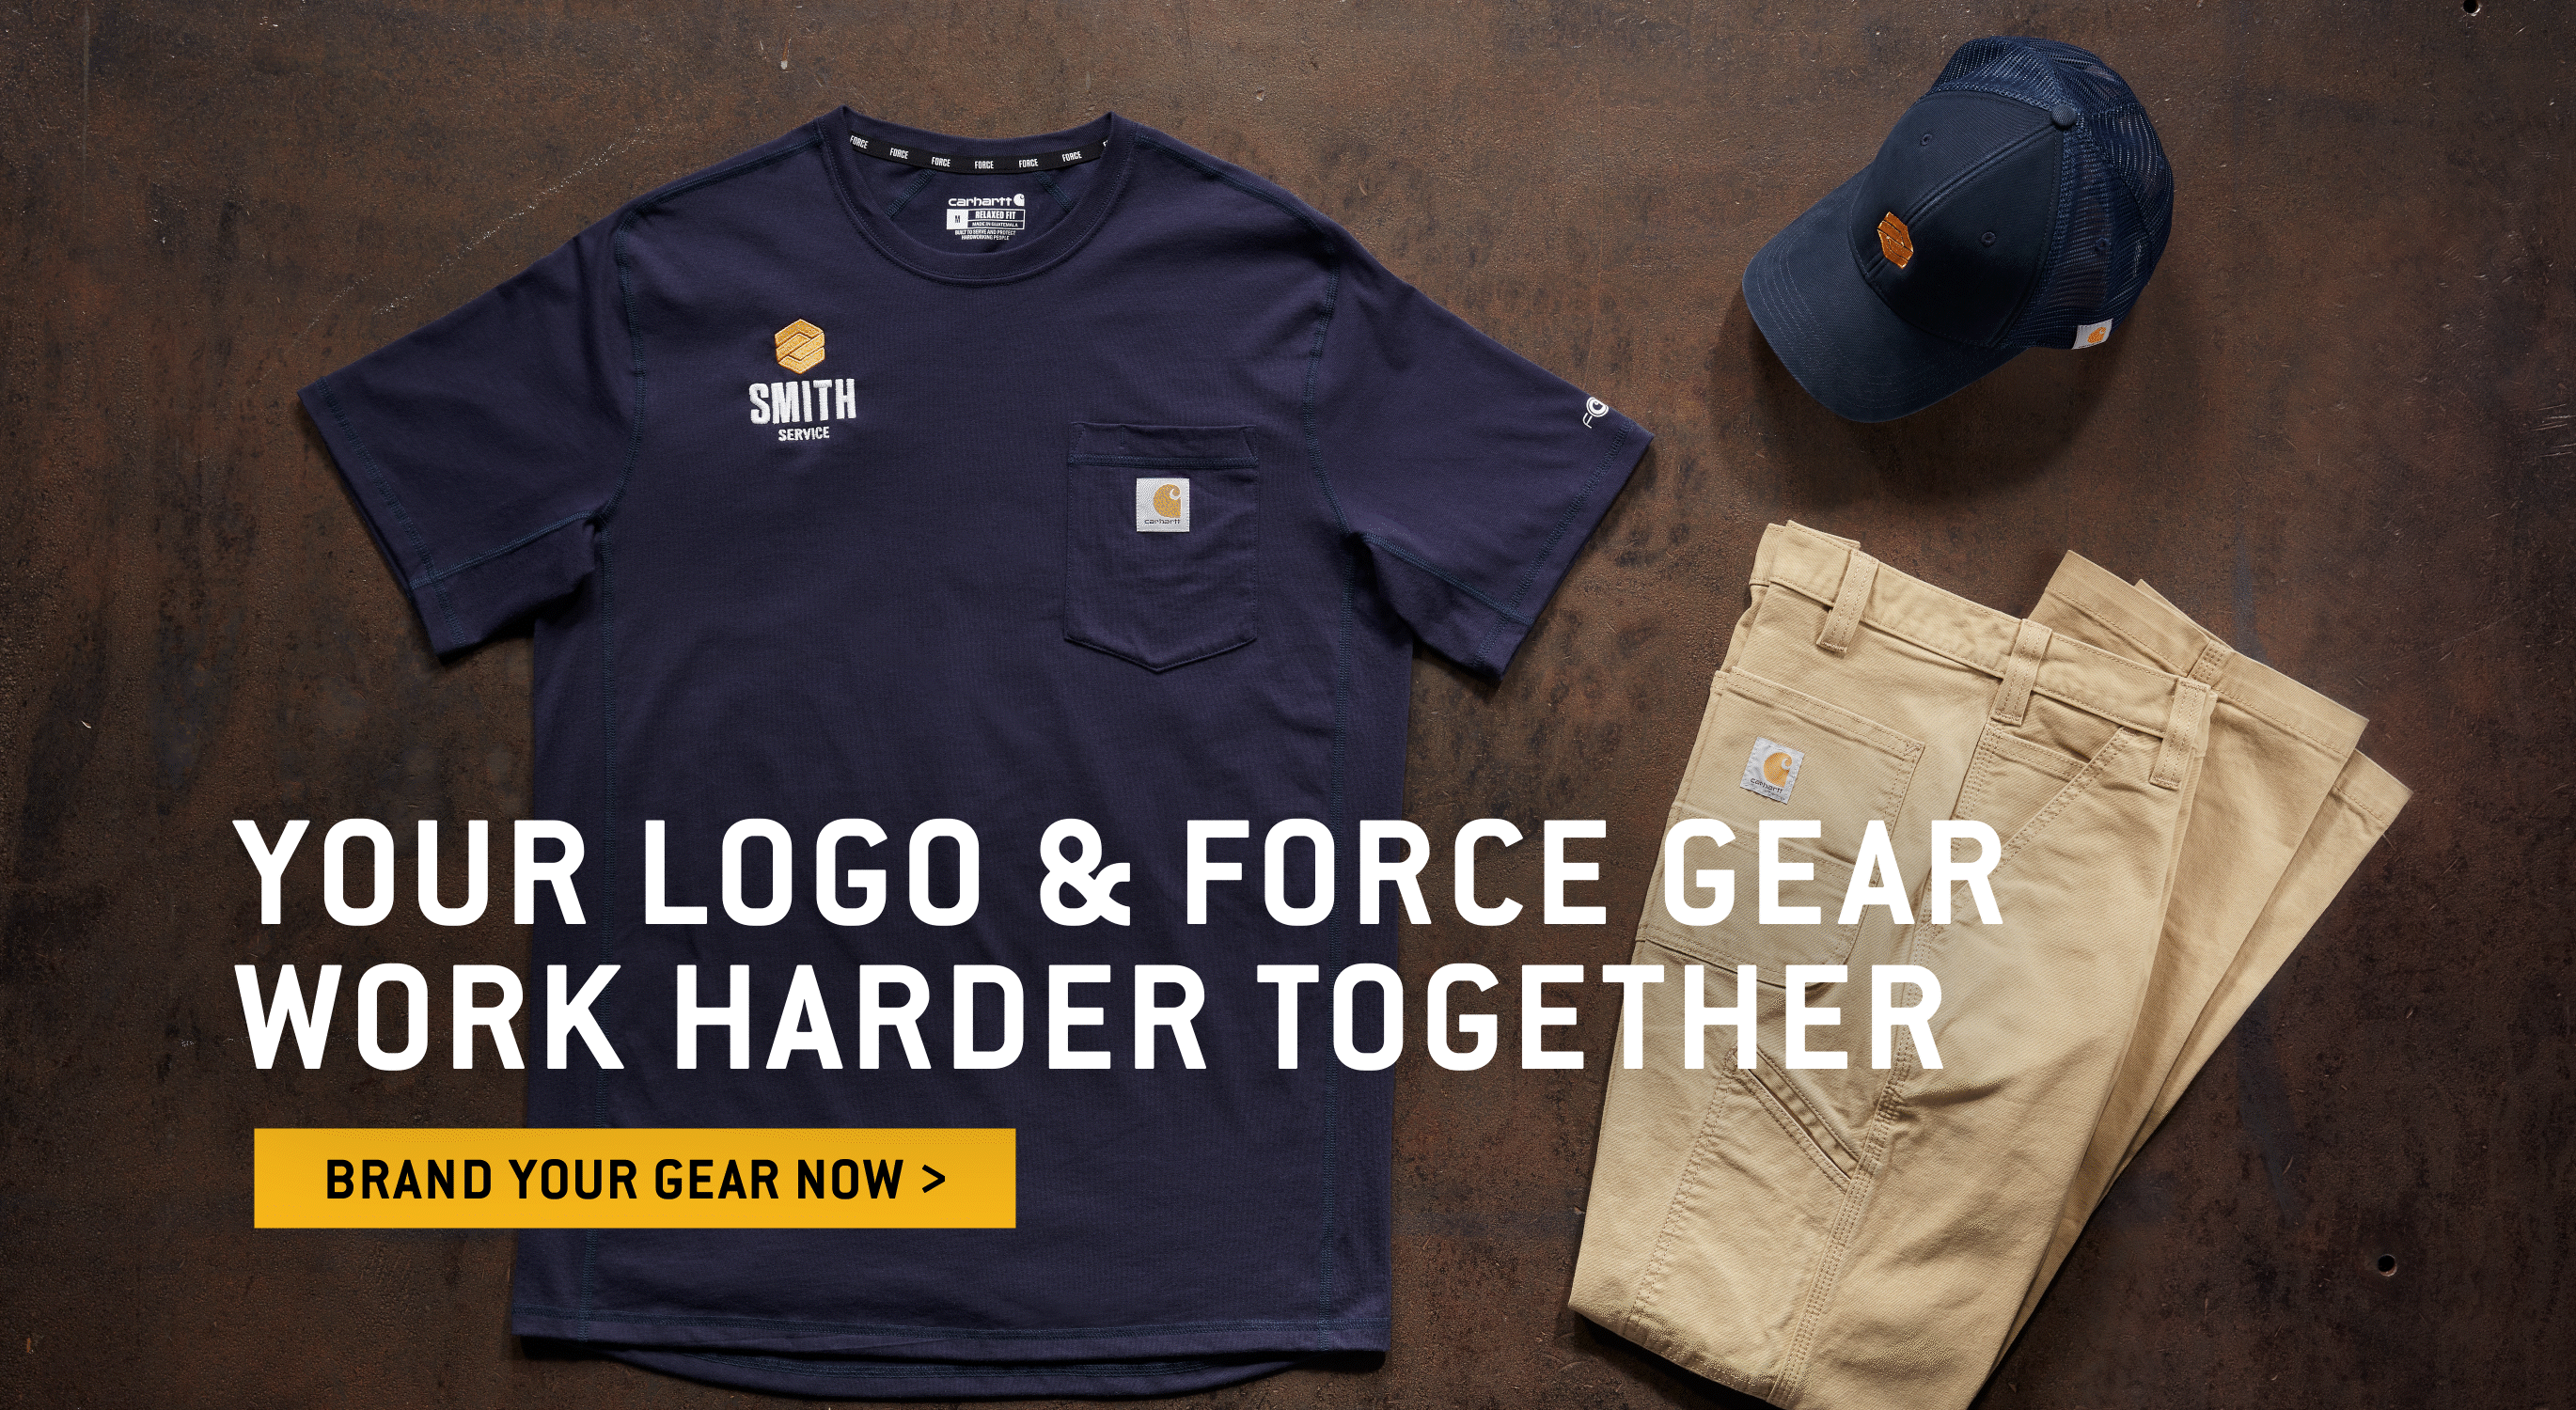 Carhartt - Built to beat the heat, rugged Carhartt shorts keep you cool and  comfortable, no matter the task.